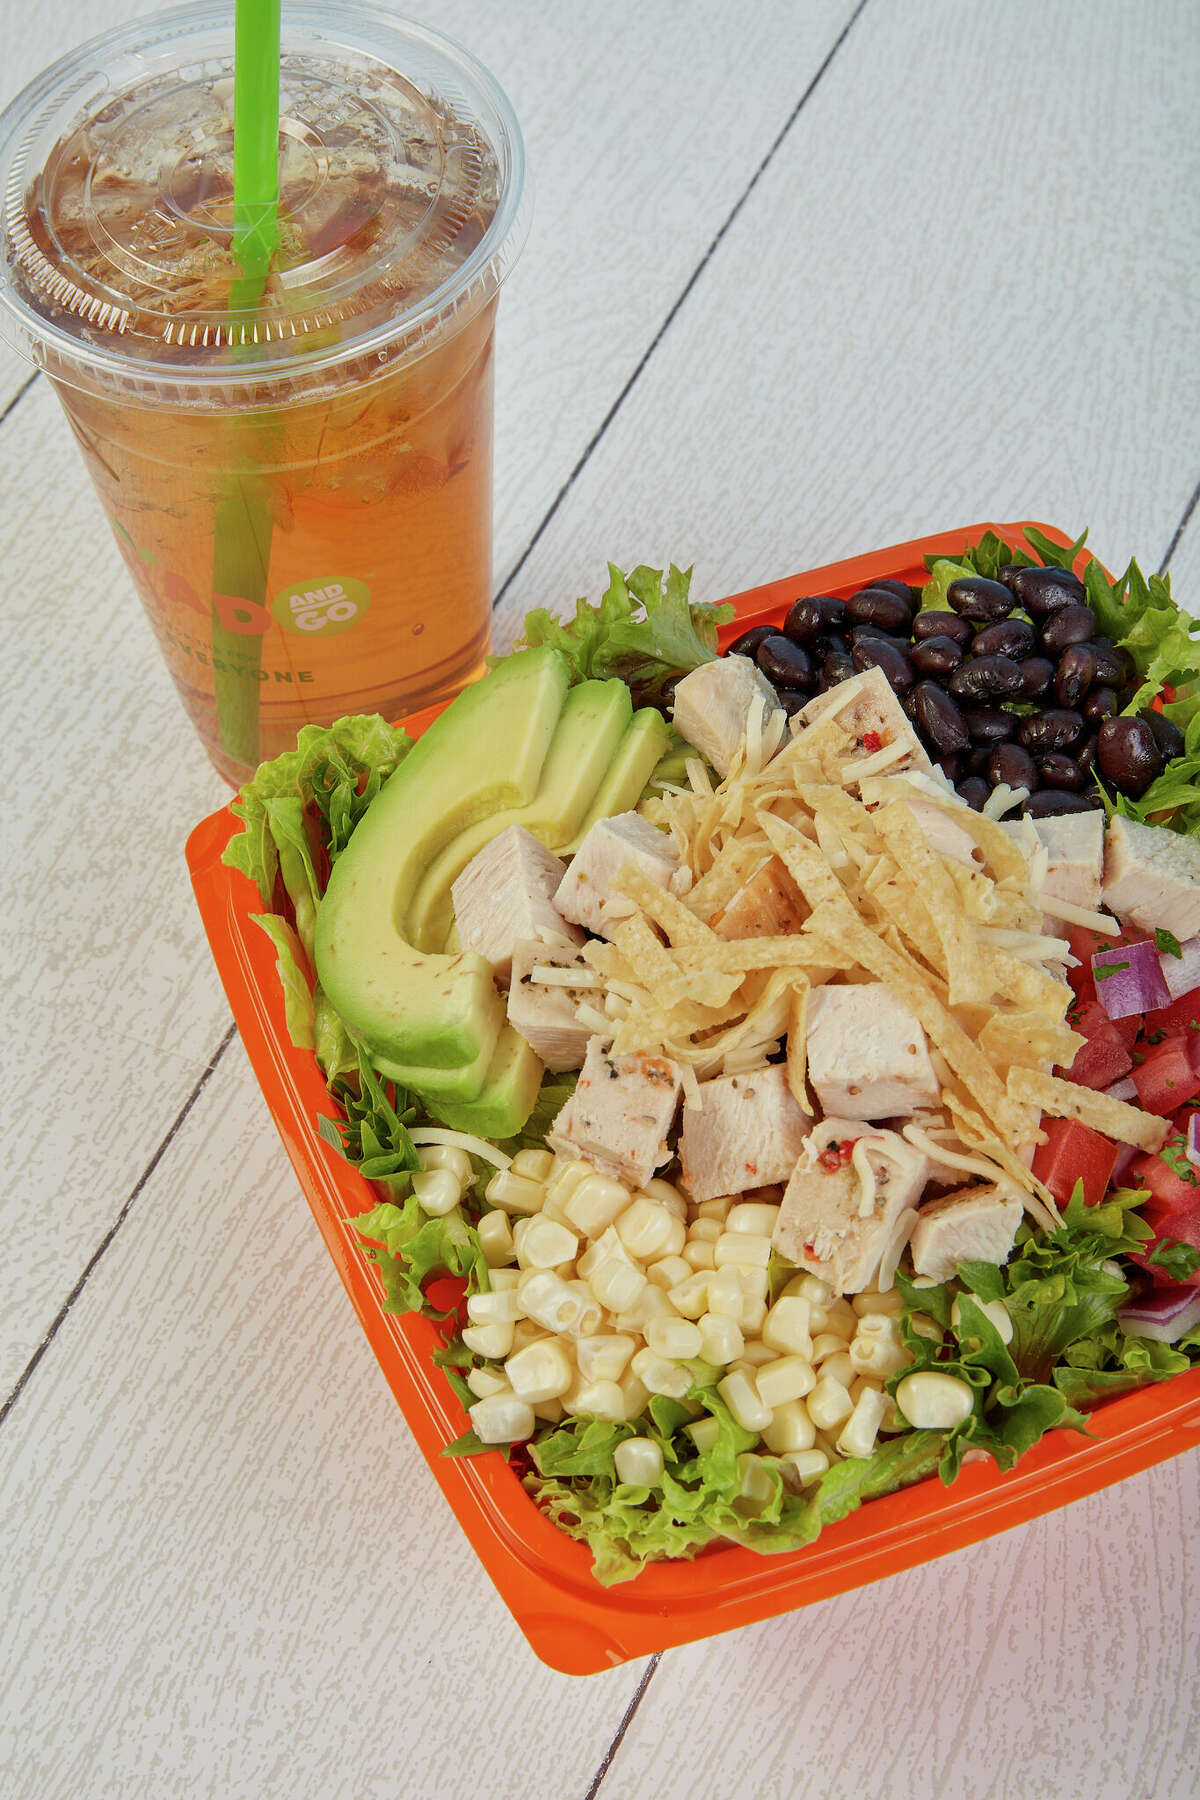 Salad and Go's BBQ Ranch and Mango Green Tea